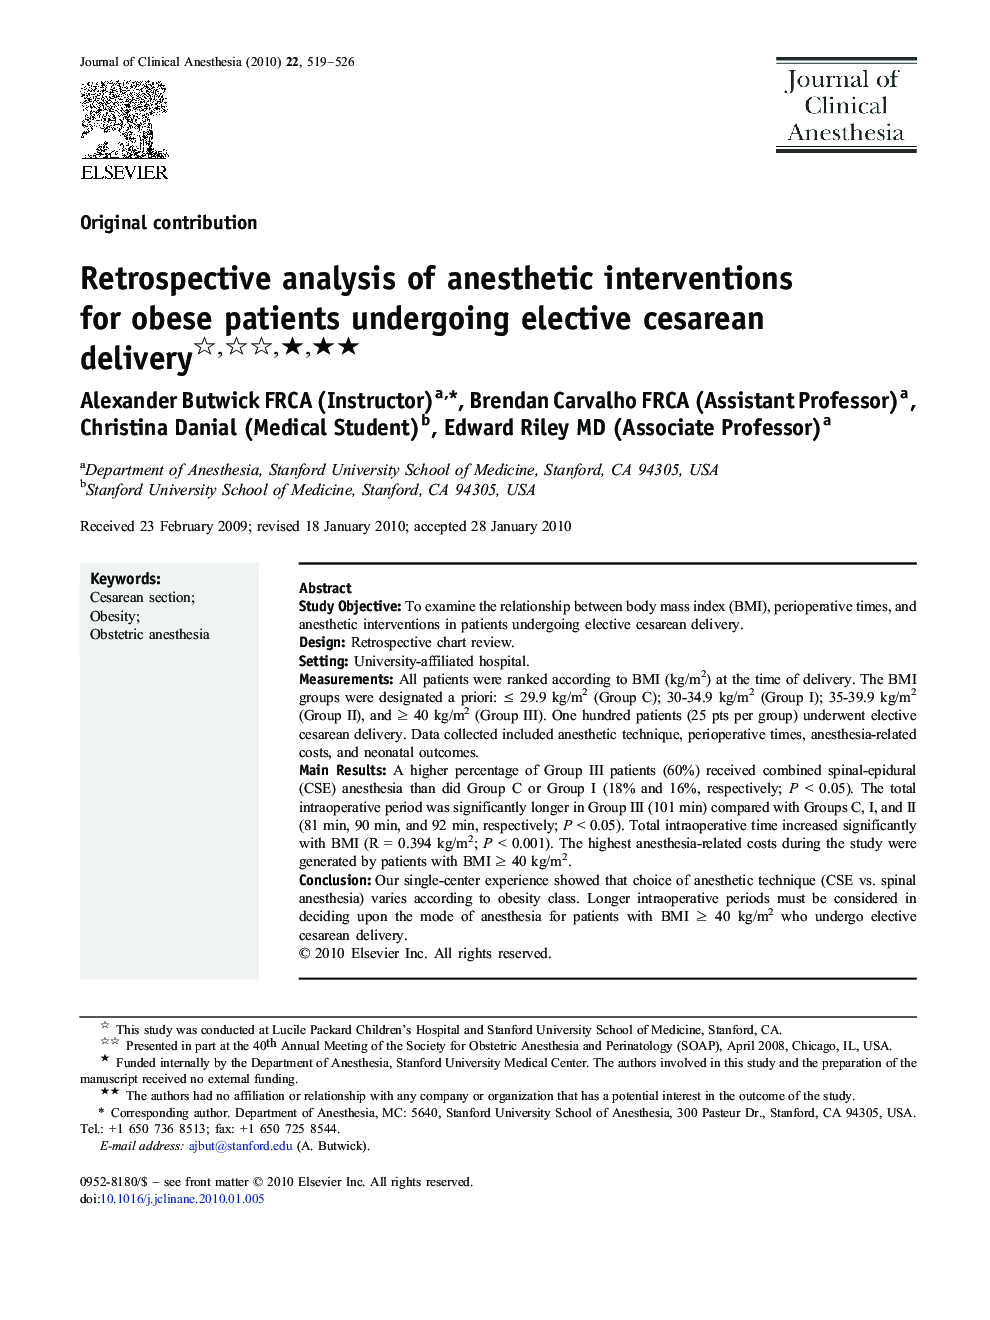 Retrospective analysis of anesthetic interventions for obese patients undergoing elective cesarean delivery ★★★